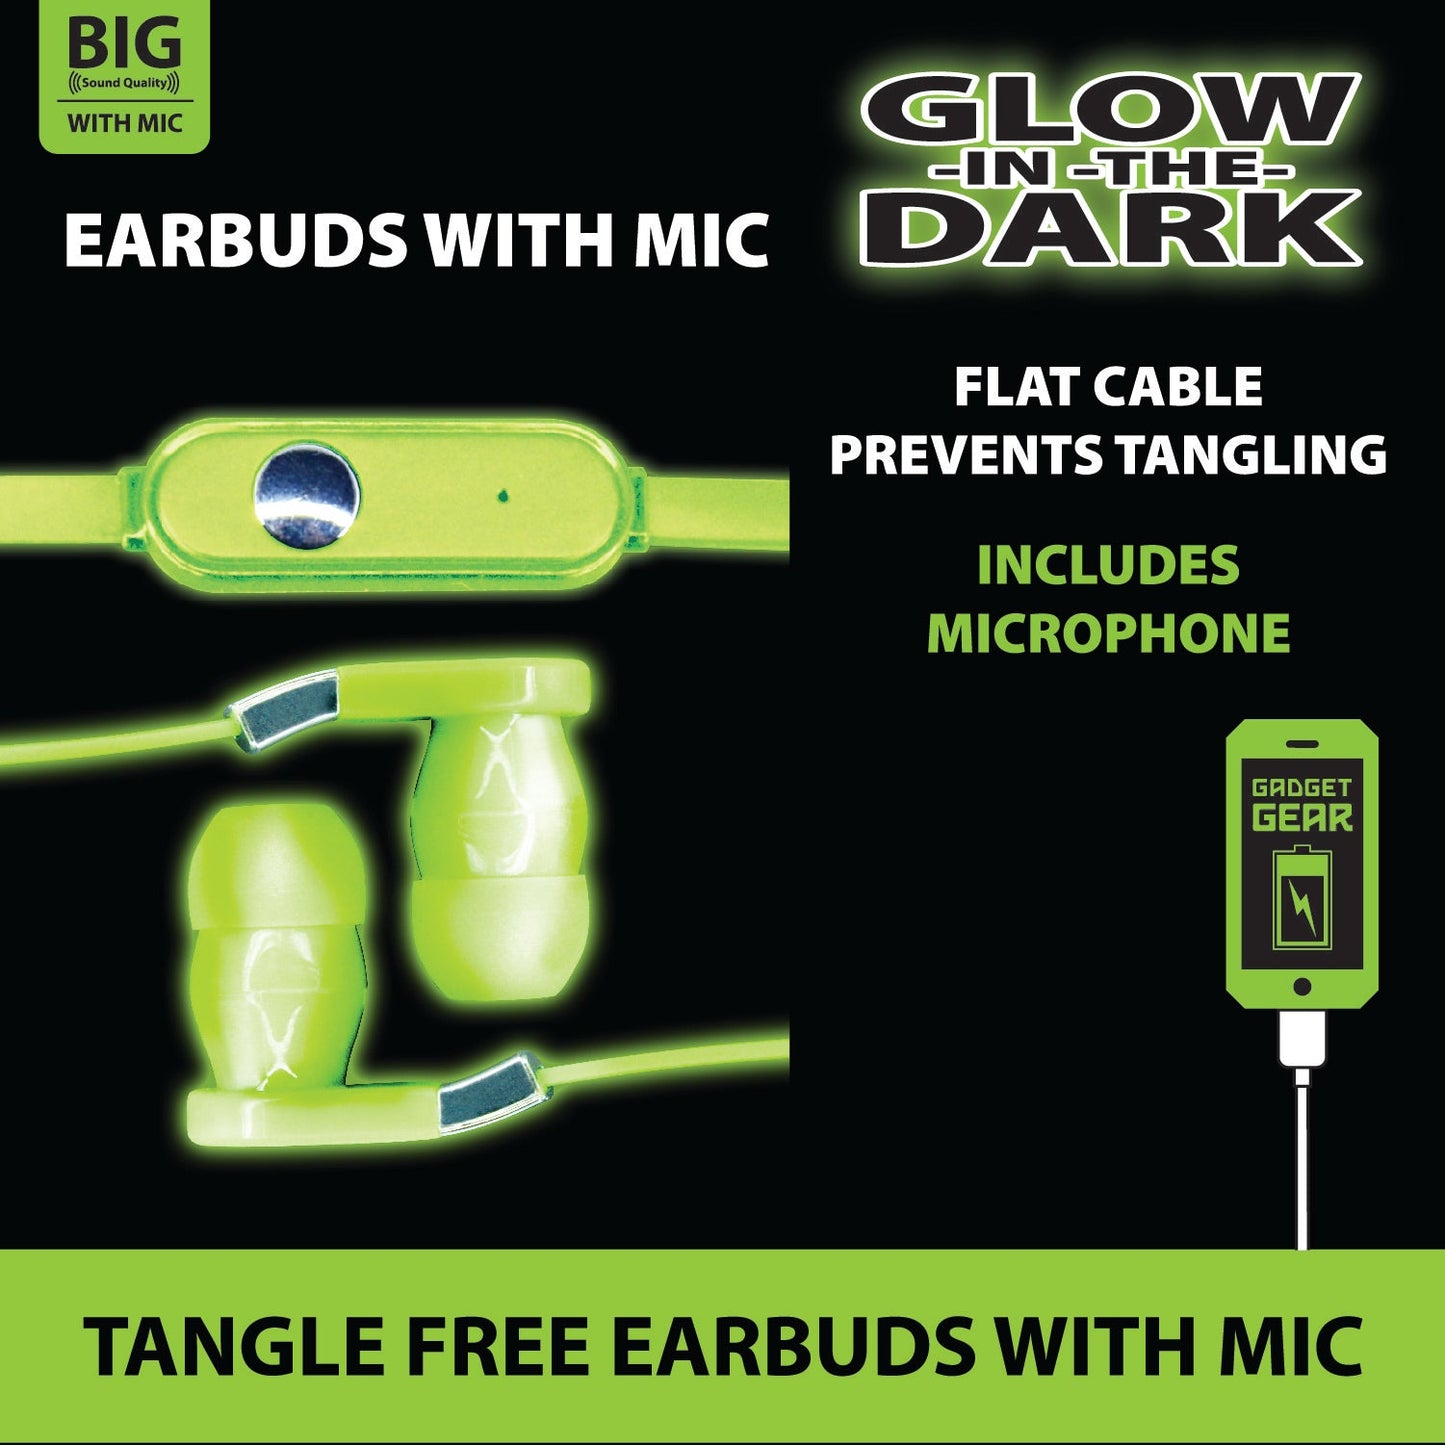 ITEM NUMBER 020614 GG GLOW IN THE DARK EARBUDS W/ MIC 3 PIECES PER PACK